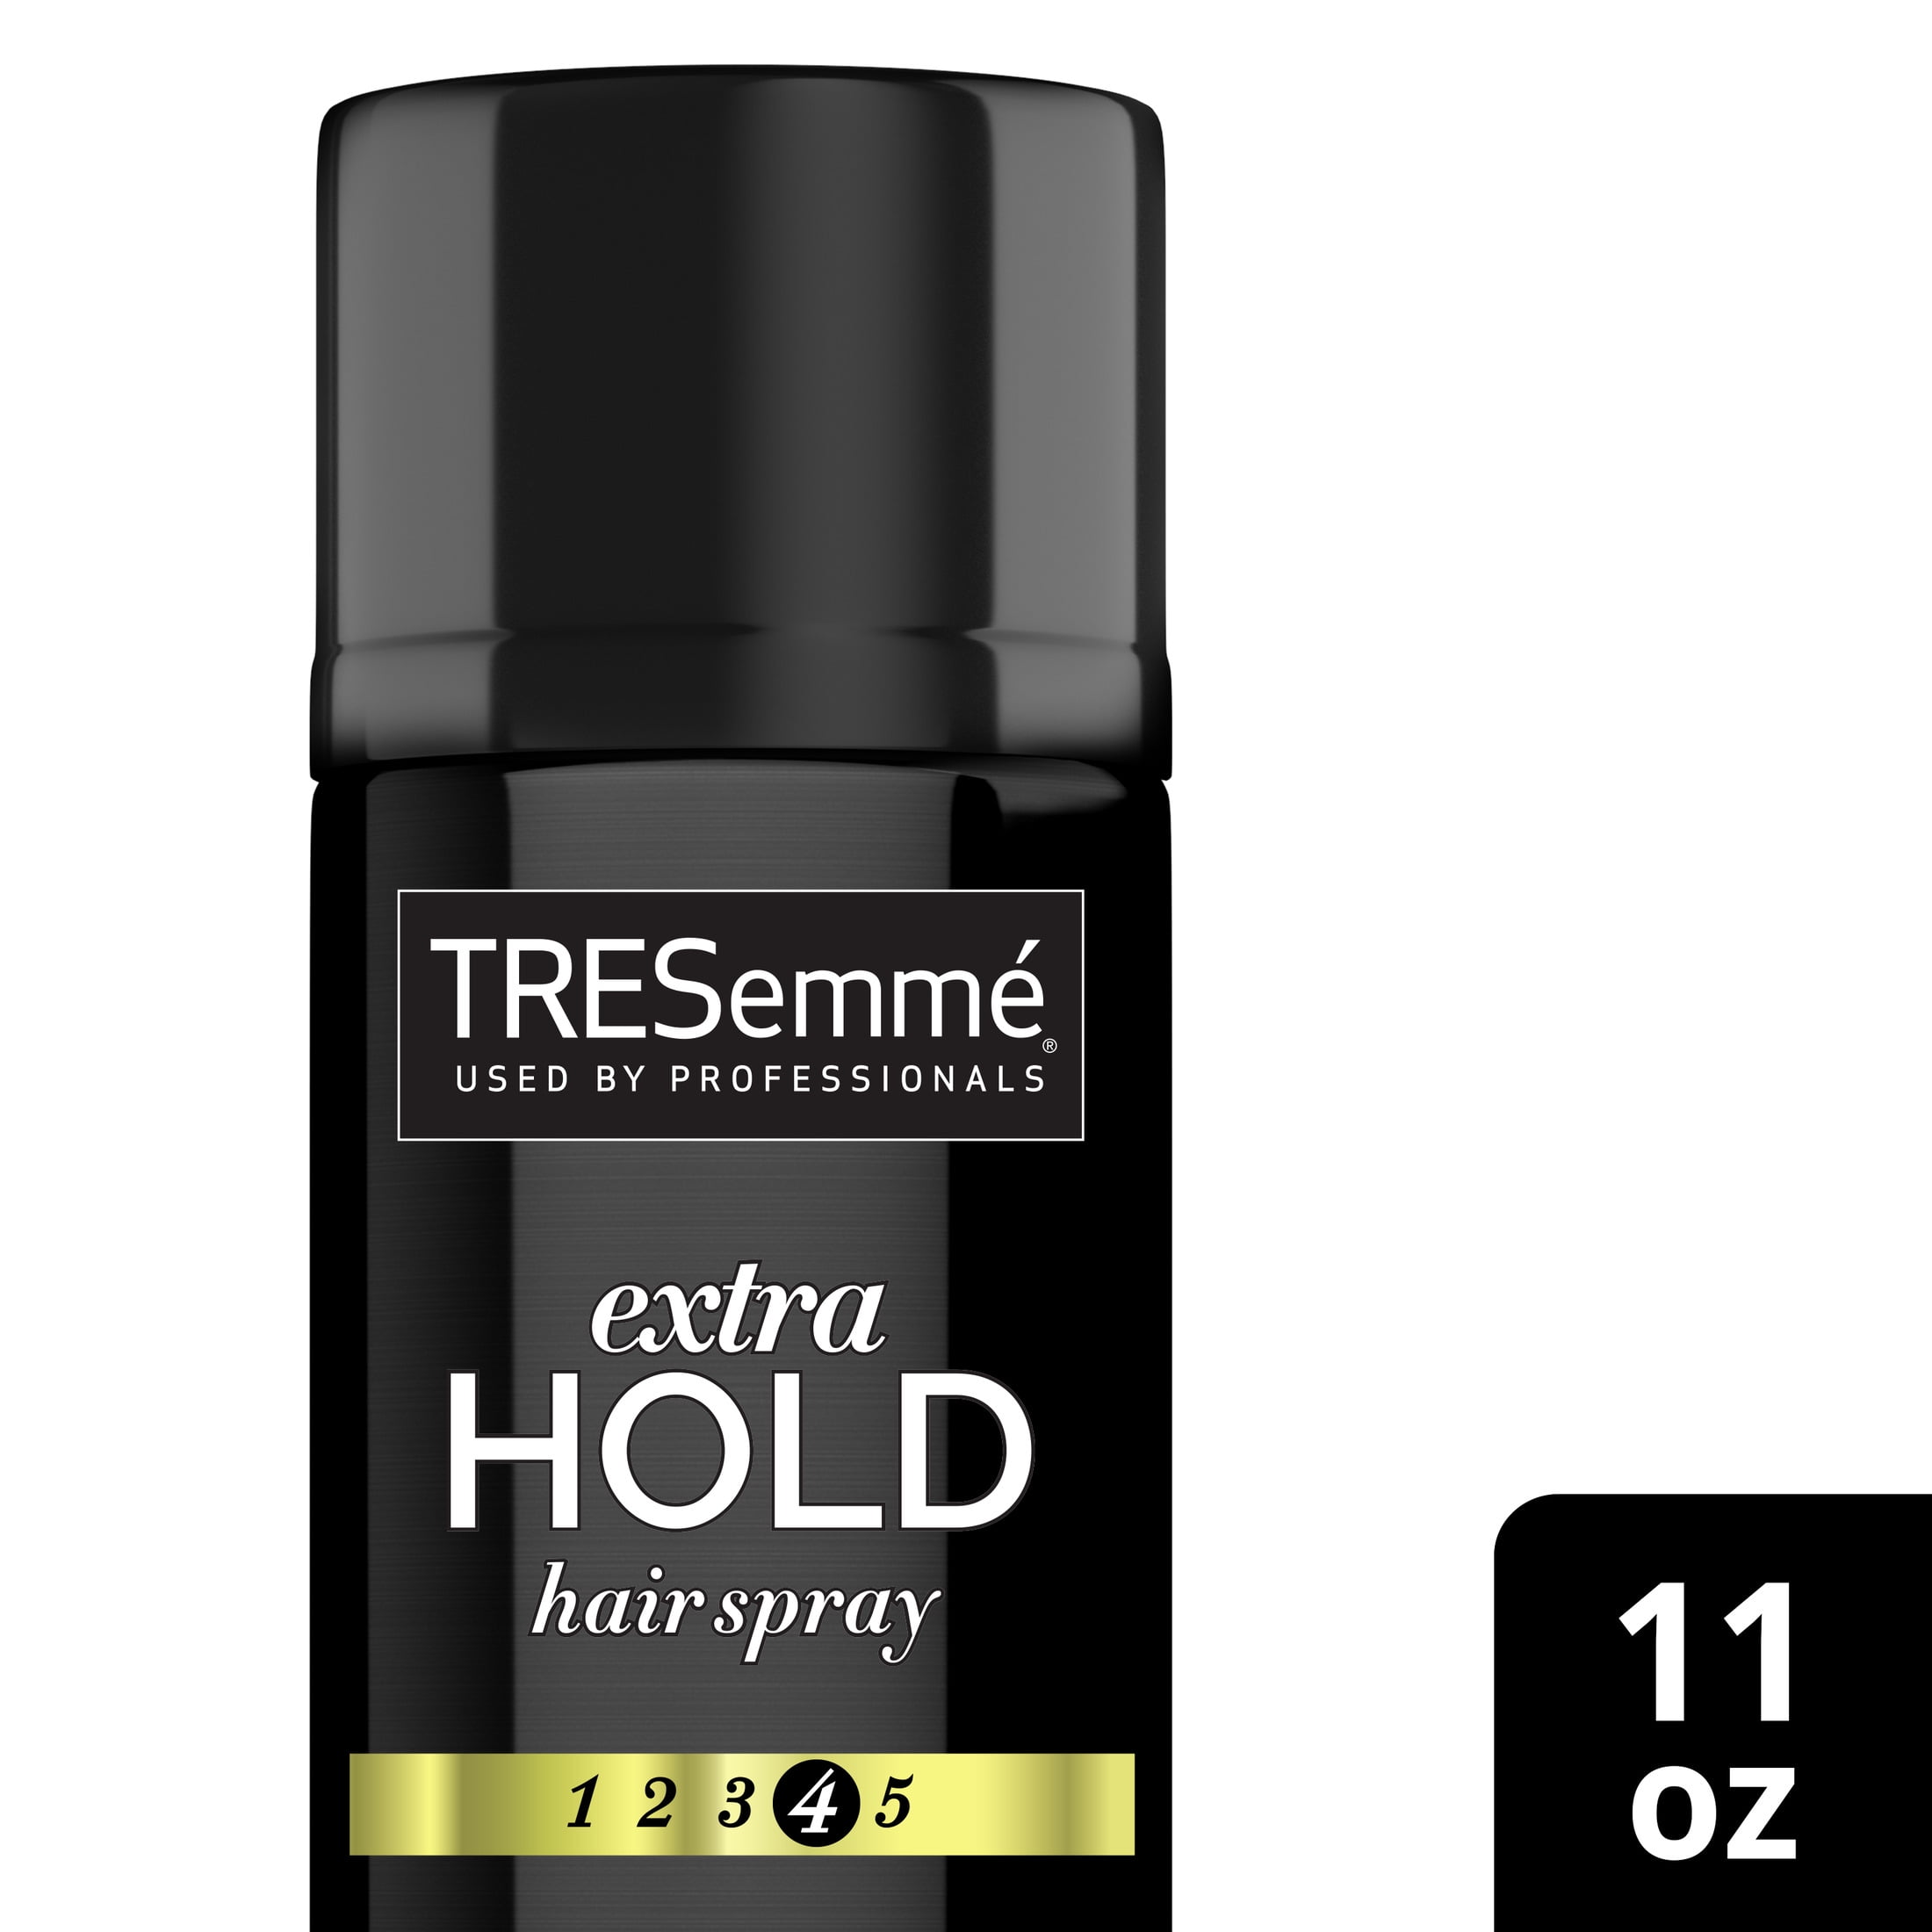 Tresemme Extra Hold Hair Spray Anti-Frizz Hairspray With All-Day Humidity Resistance, 11 oz